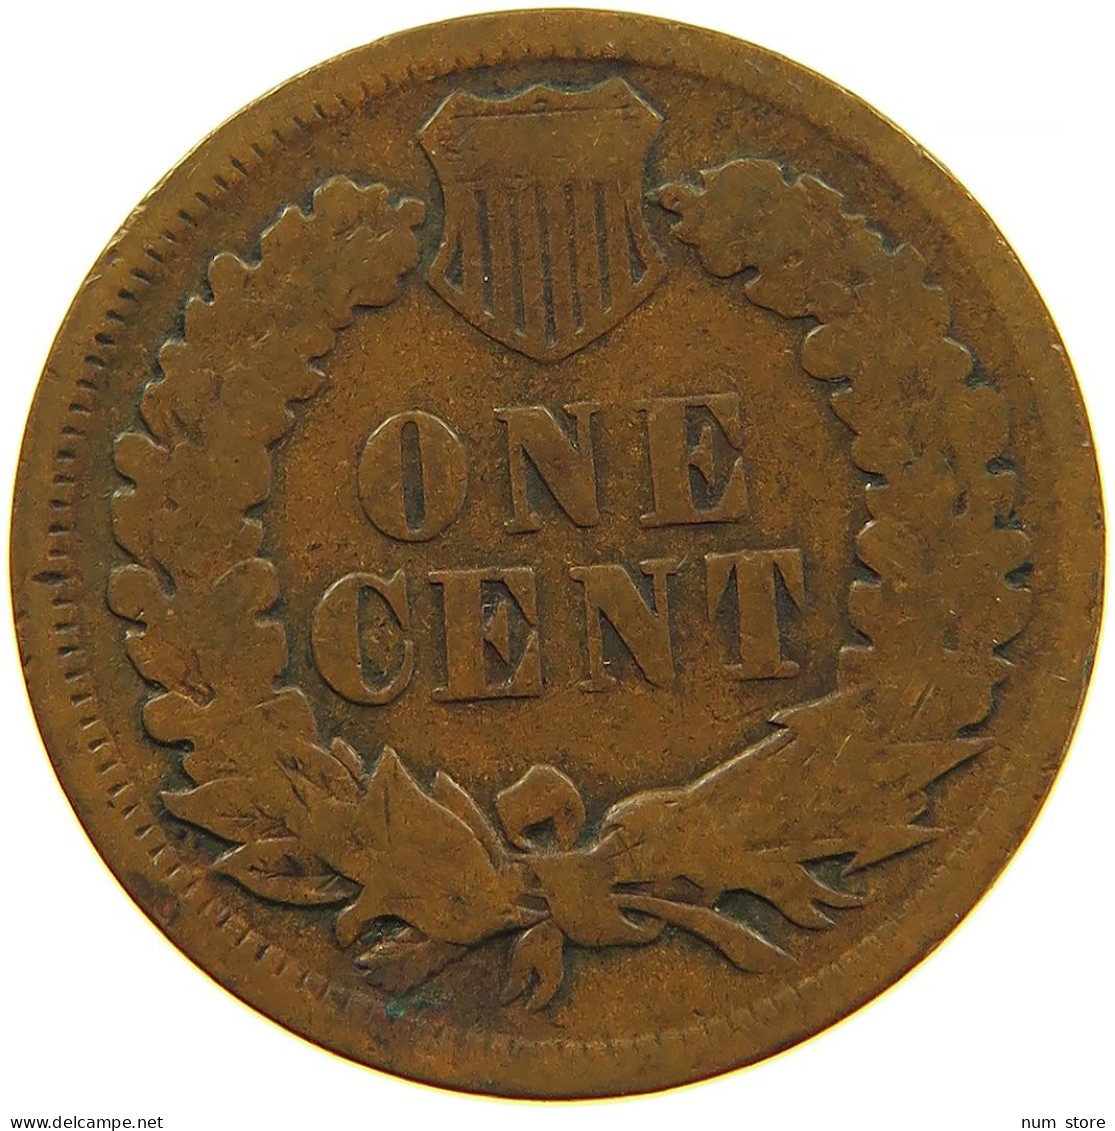 UNITED STATES OF AMERICA CENT 1893 INDIAN HEAD #s091 0381 - 1859-1909: Indian Head